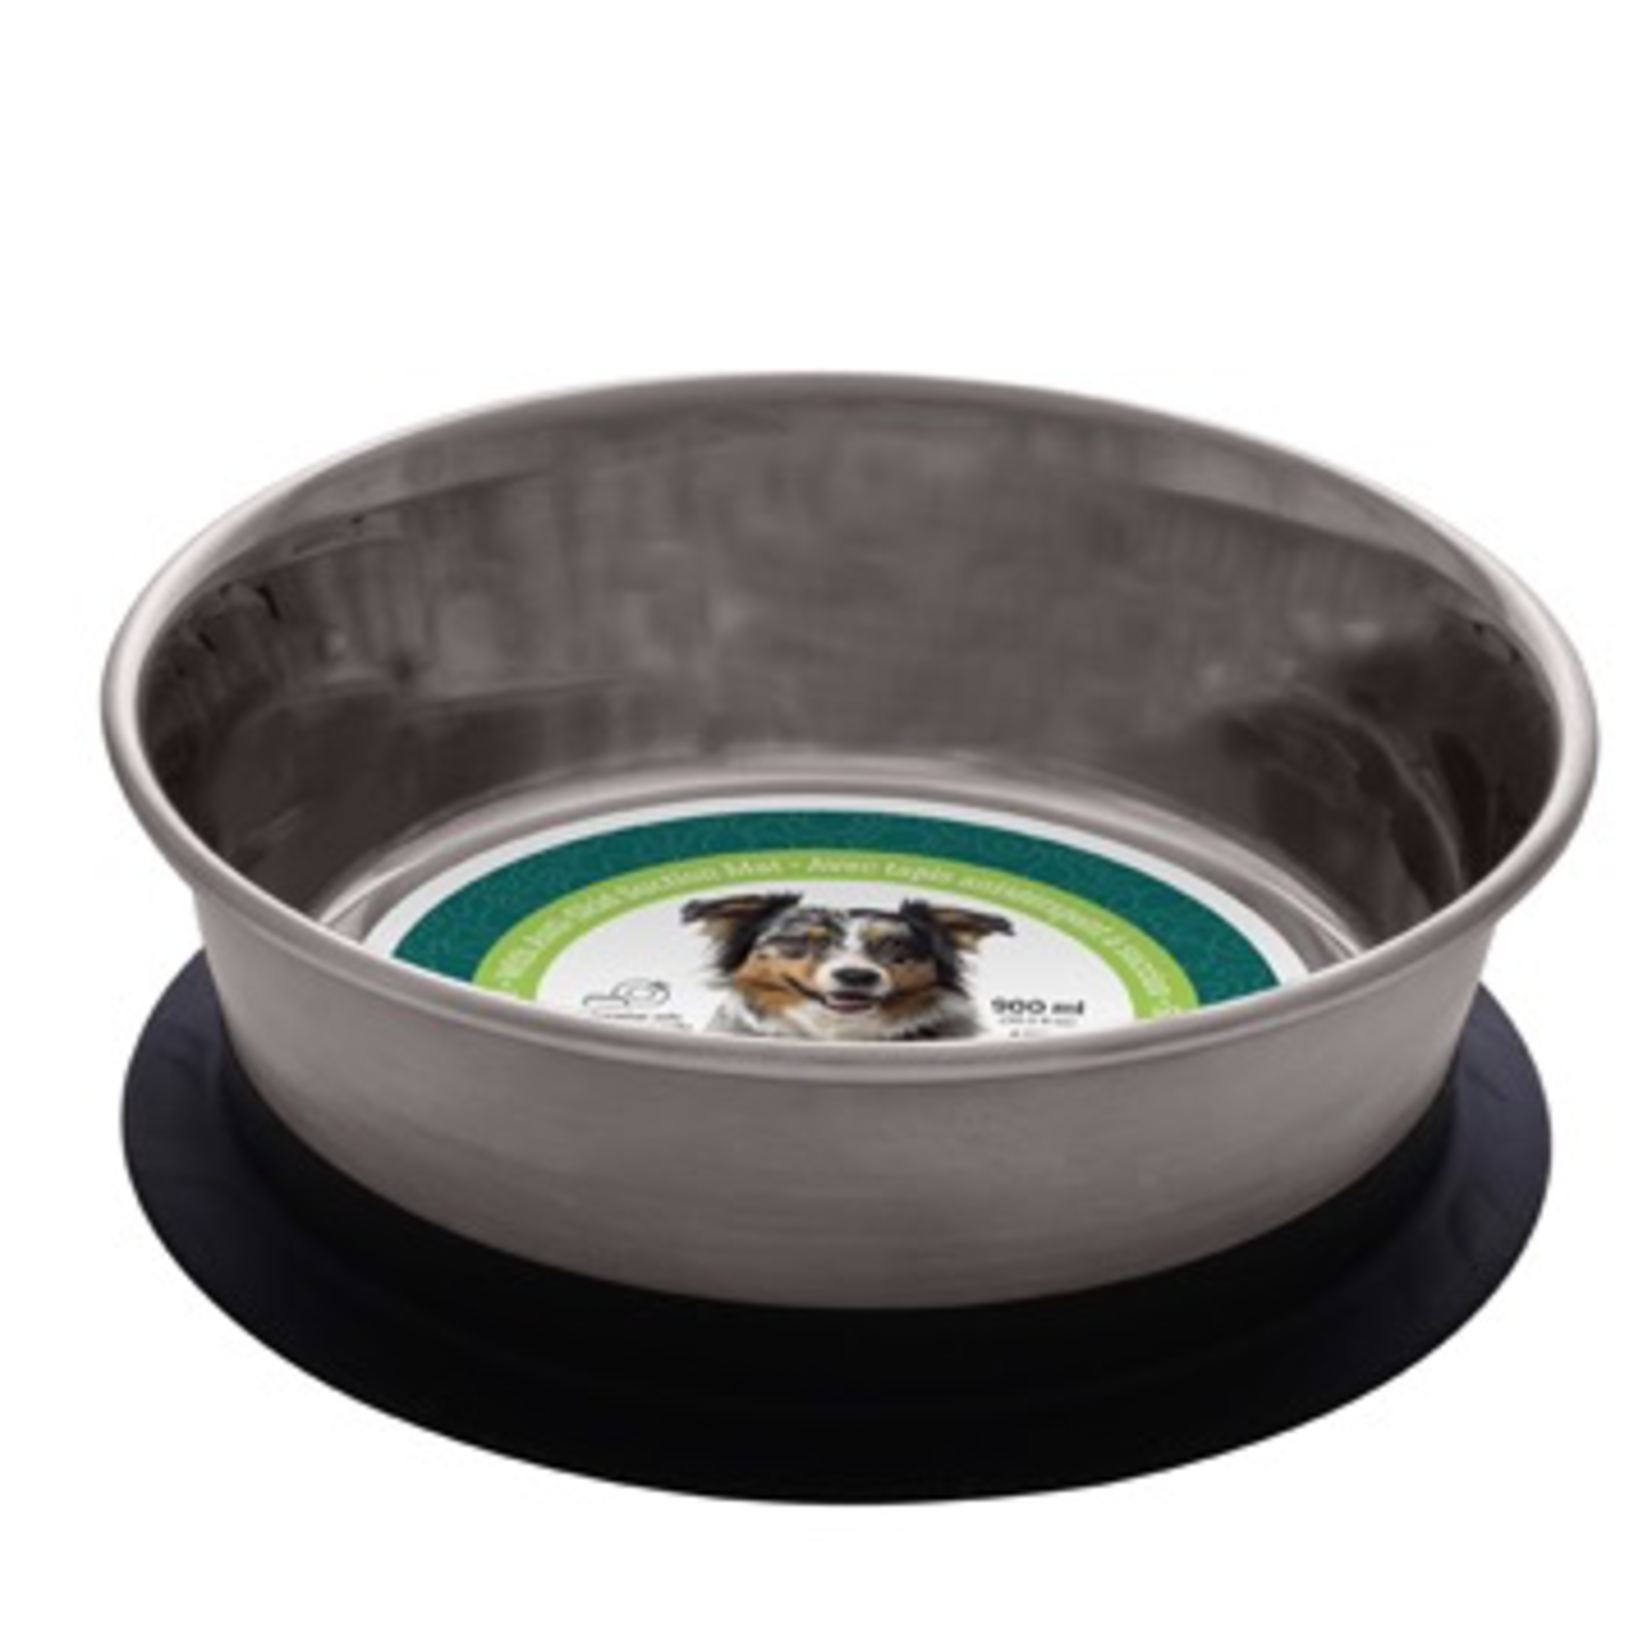 DOG IT (W) Dogit Stainless Steel Non-Skid Stay-Grip Dog Bowl - 900 ml (30.5 fl.oz.)